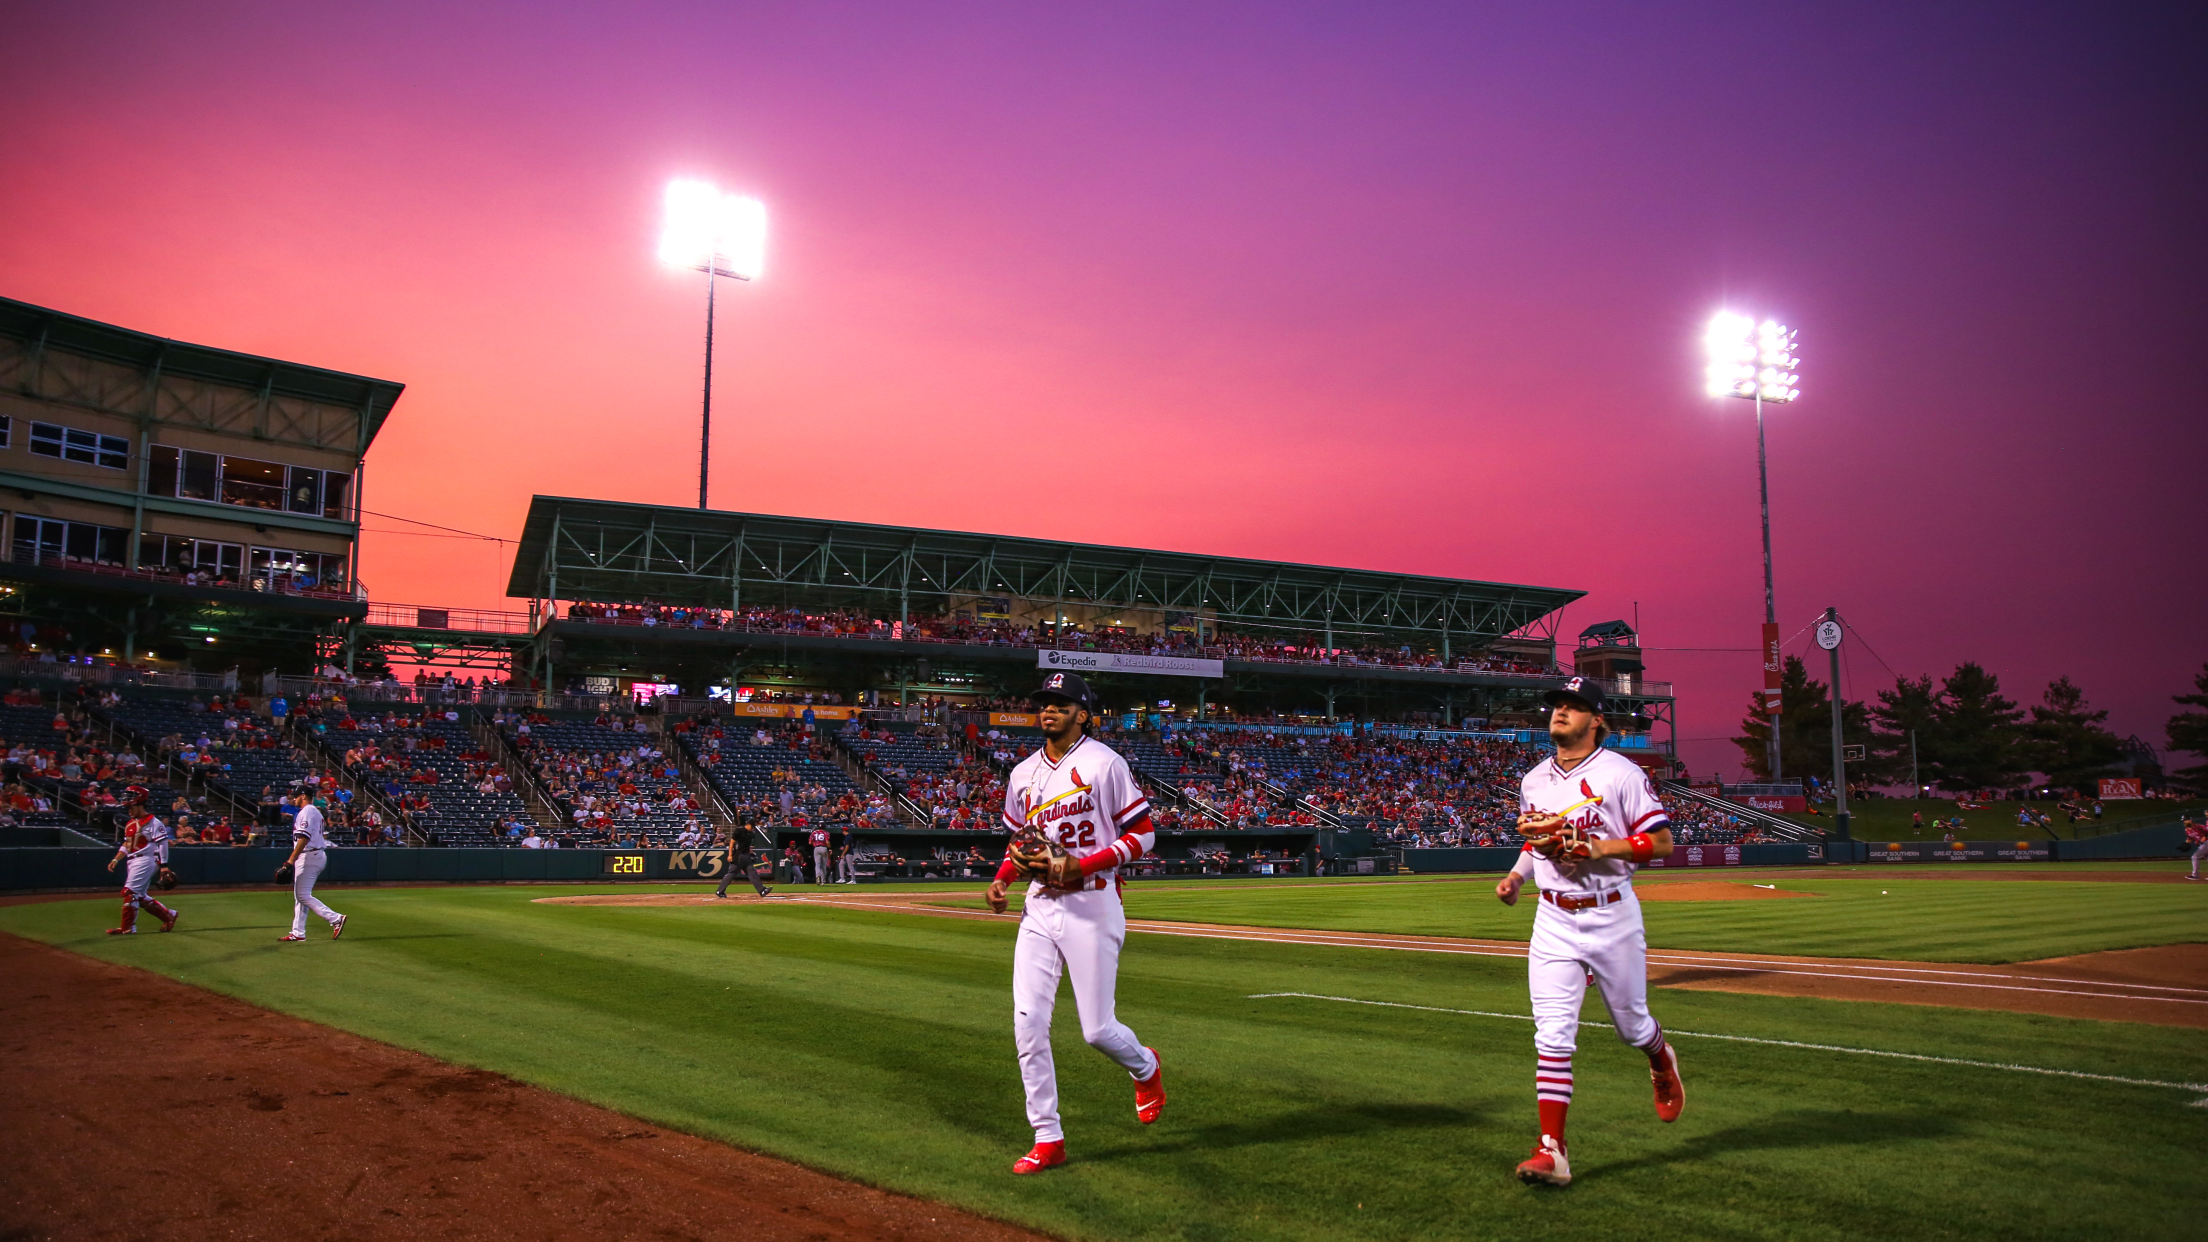 Try Hammons Trade home of the Springfield Cardinals